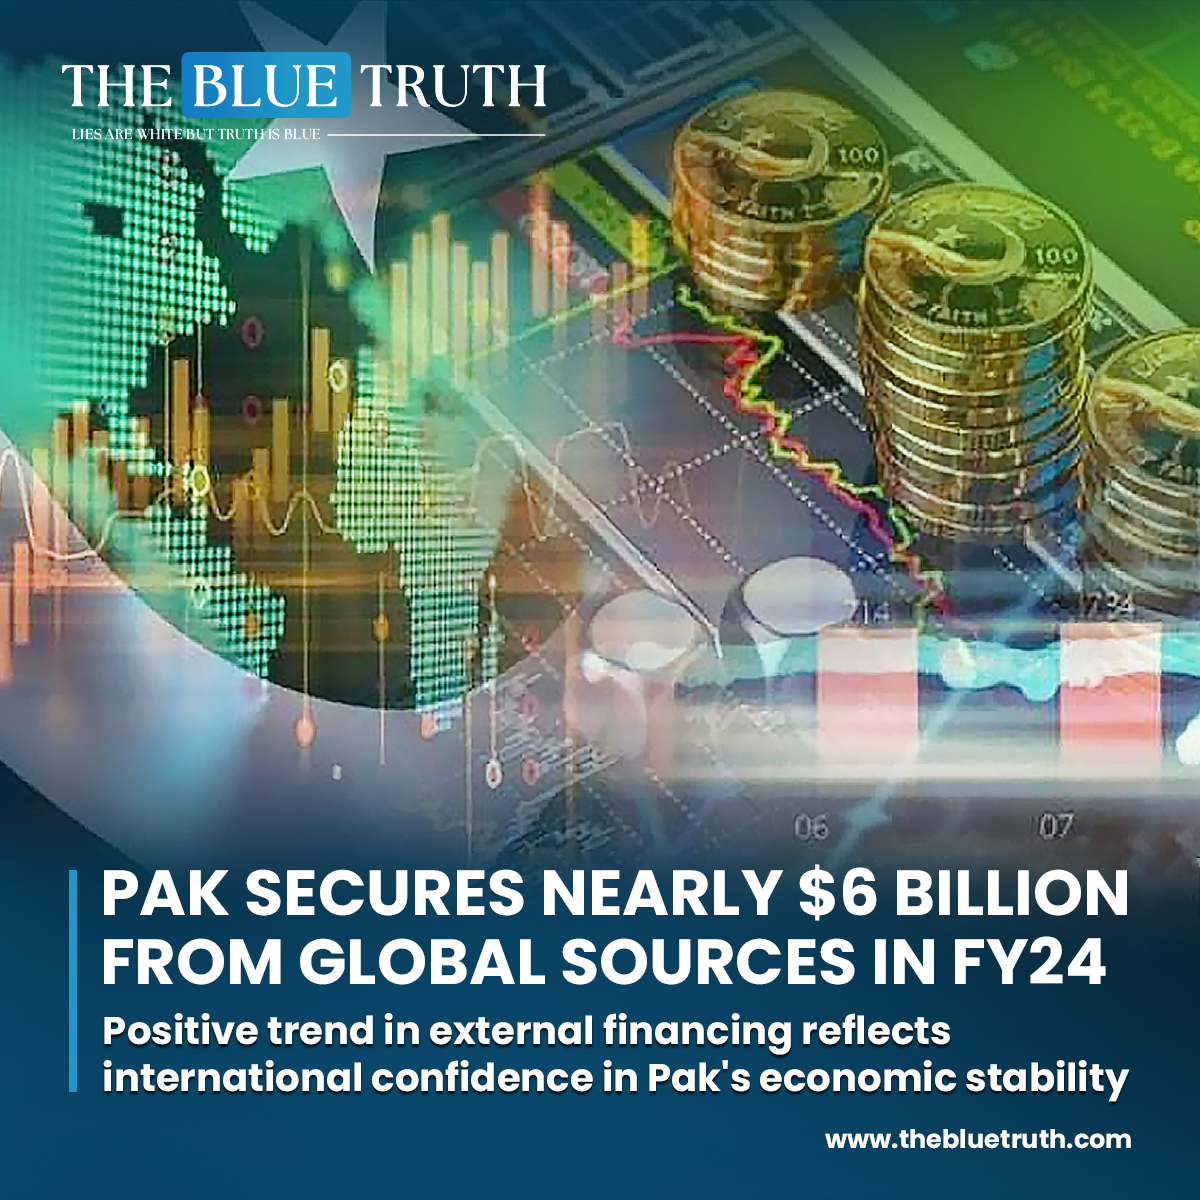 Pakistan has successfully secured external financing amounting to $5.968 billion in the first half of the fiscal year 2024.
#GlobalFunding #FinancialAchievement #EconomicSuccess #InternationalInvestment
#ForeignFunds #EconomicGrowth #FinancialNews #tbt #TheBlueTruth